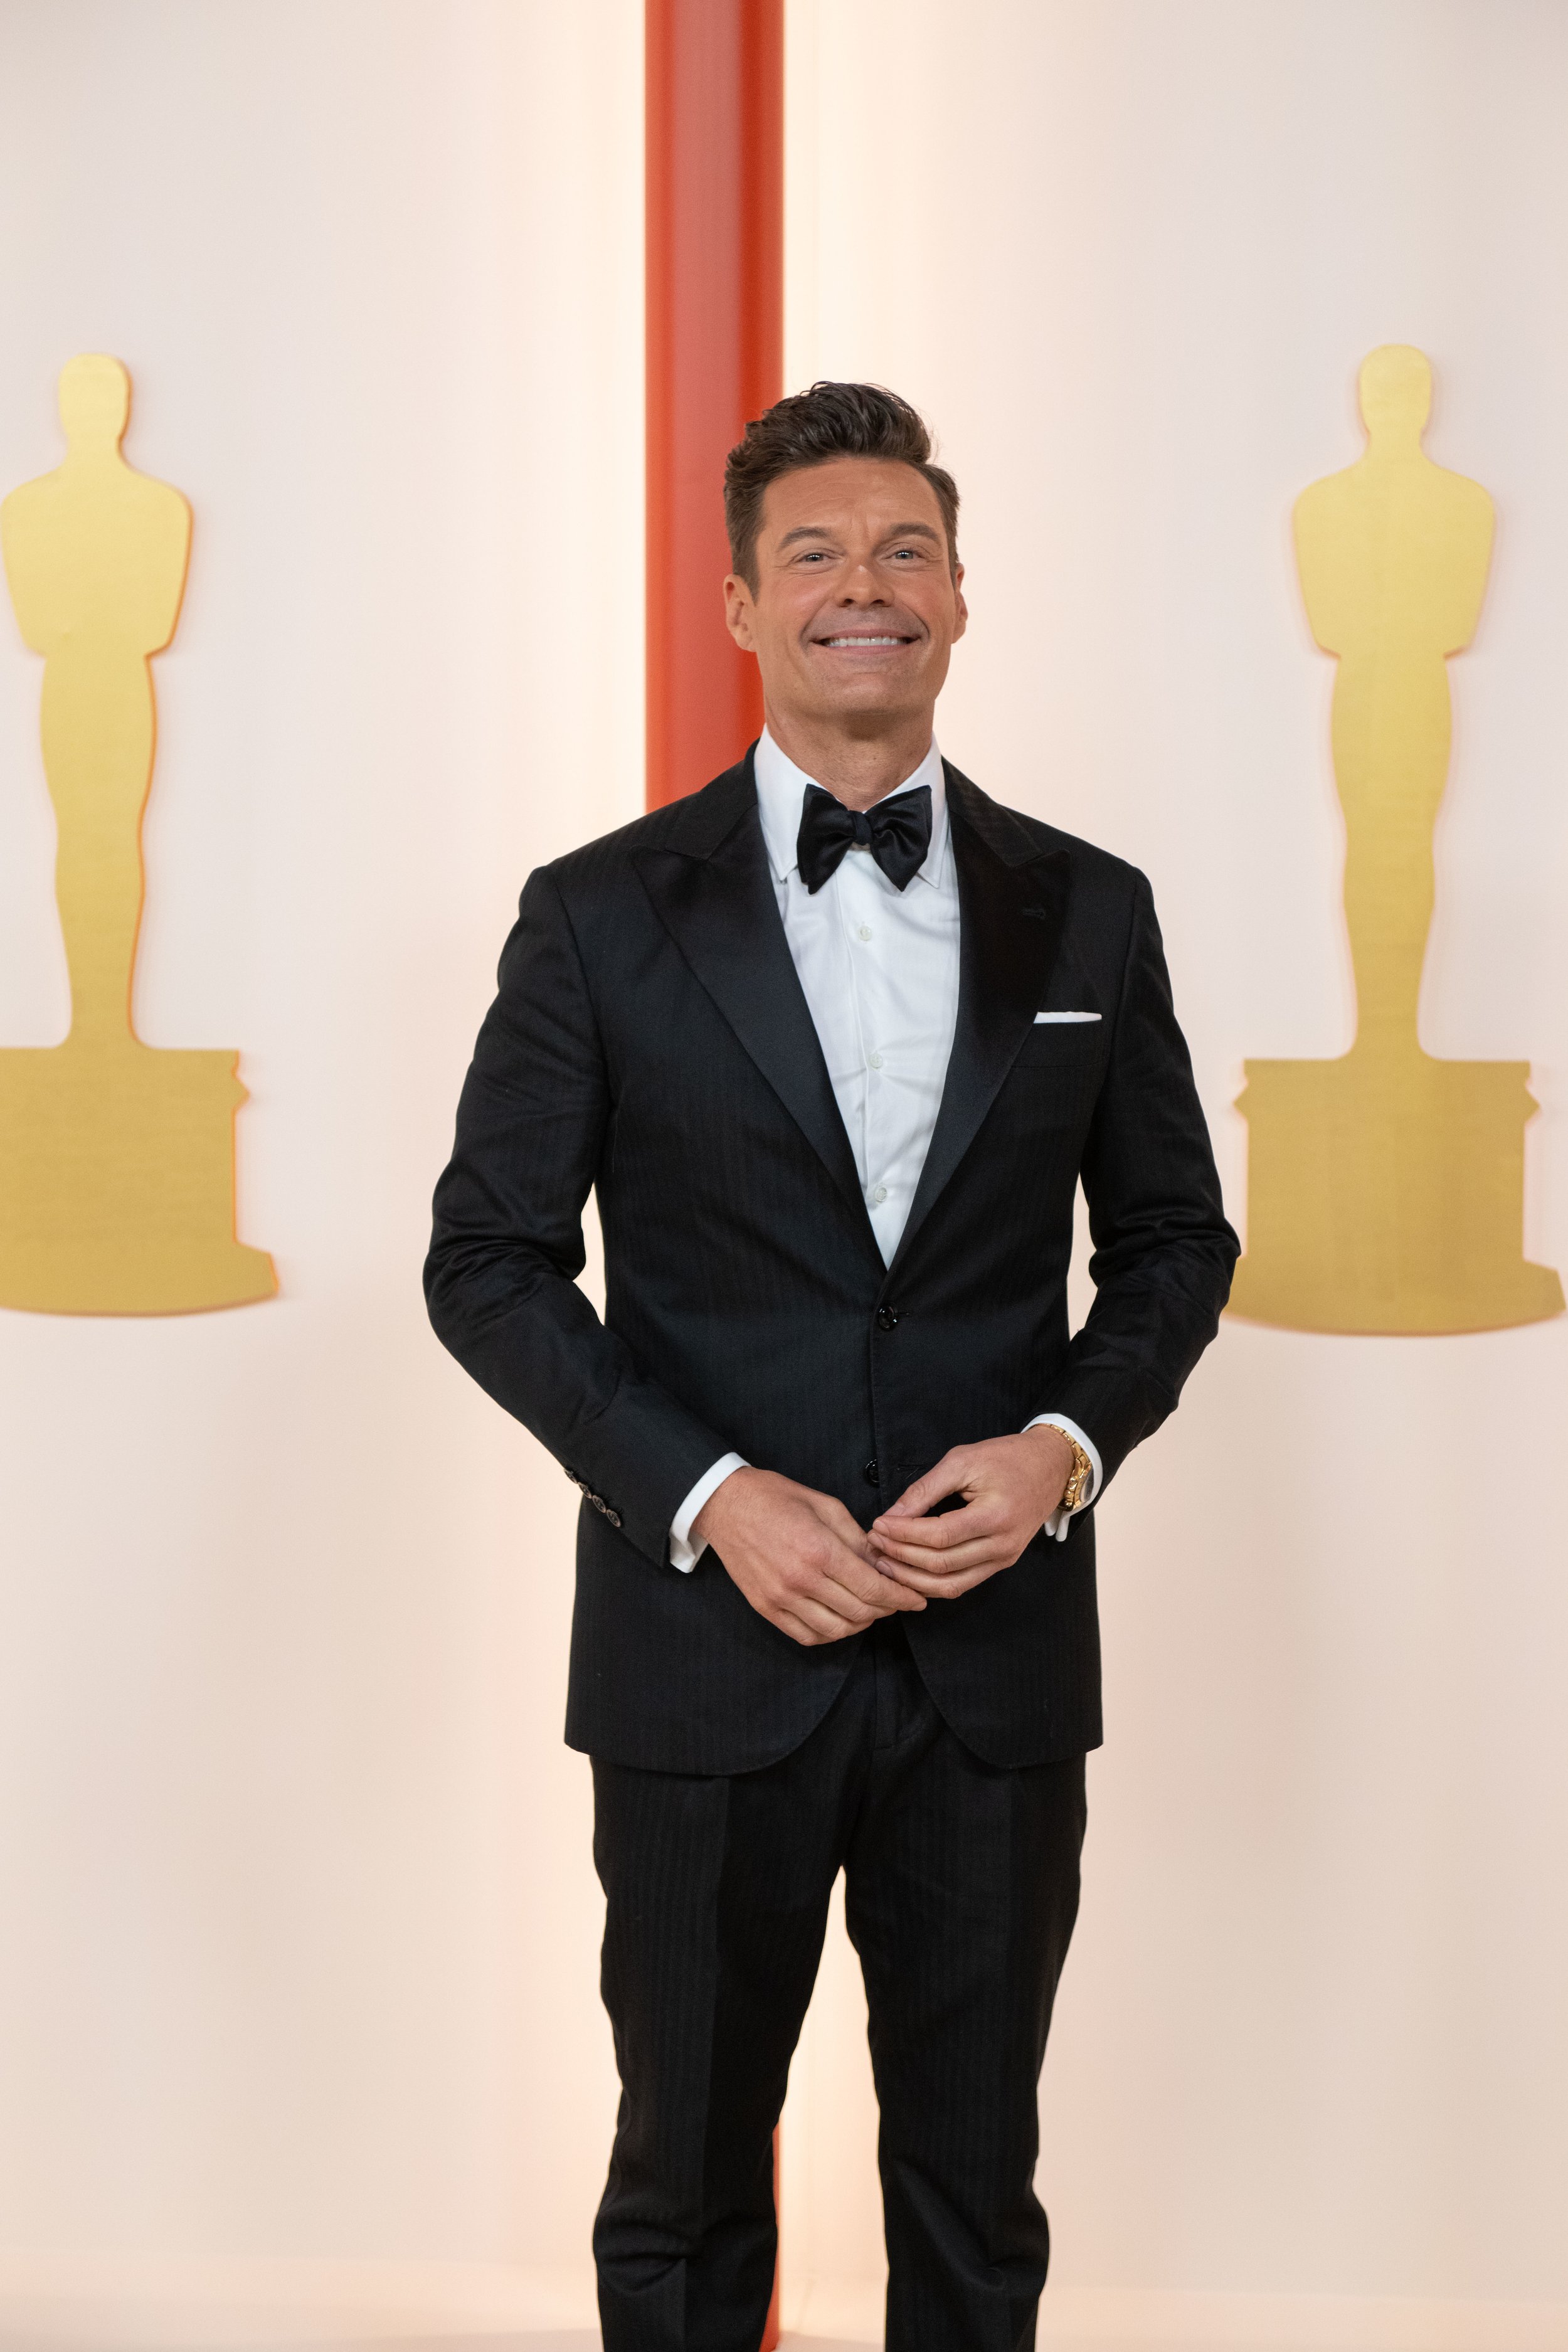 Ryan Seacrest arrives on the red carpet of the 95th Oscars® at the Dolby